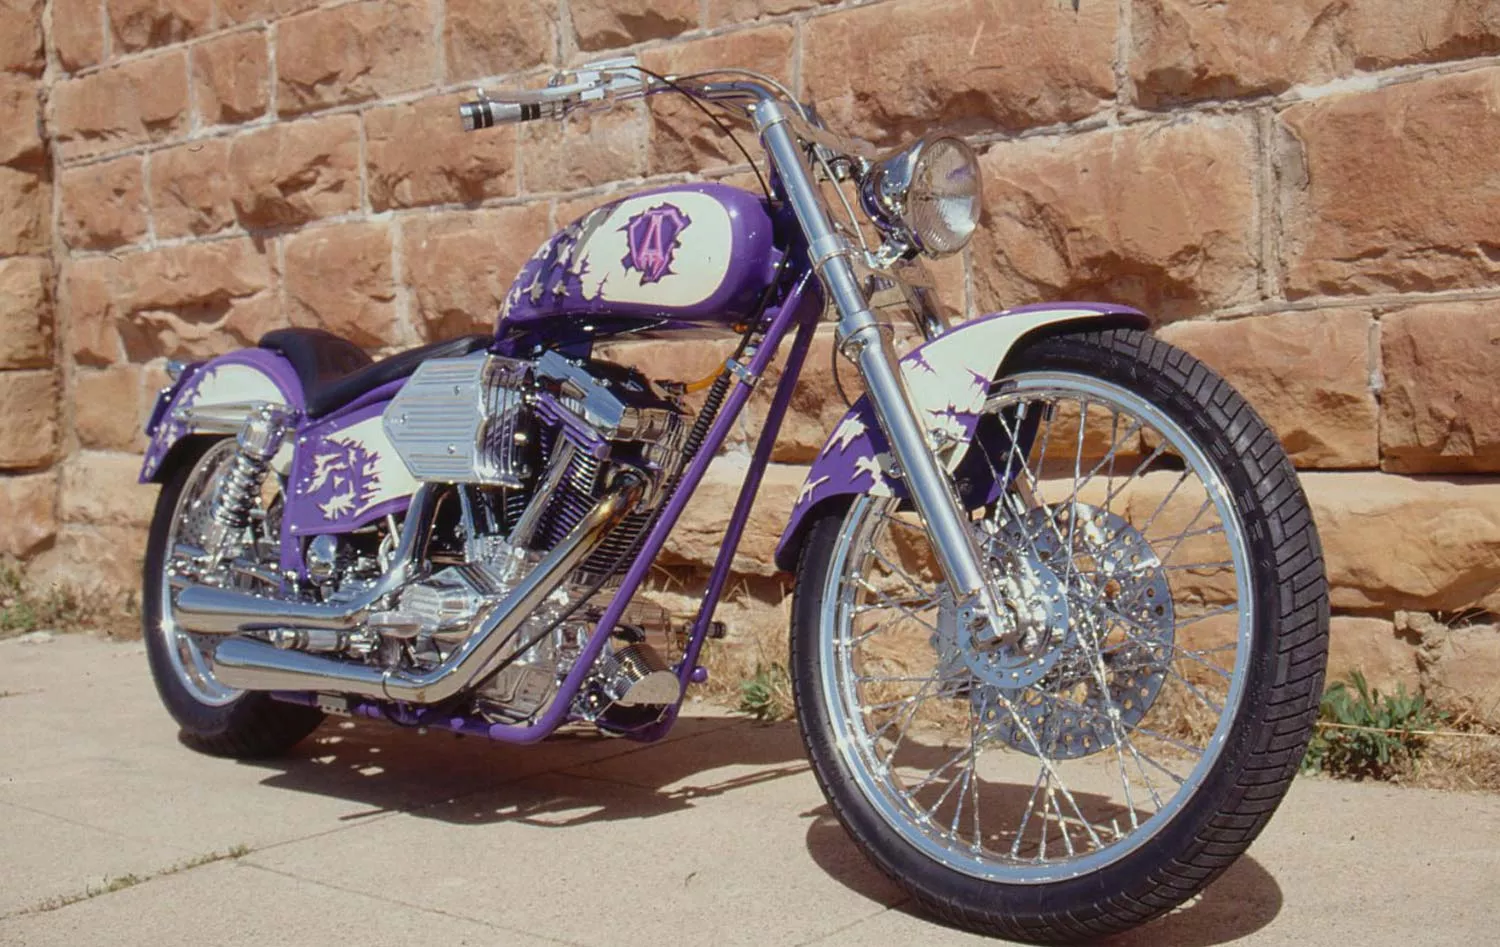 The color on Cory Ness’ 1994 Harley-Davidson FXR was inspired by his son Zack’s swimsuit.